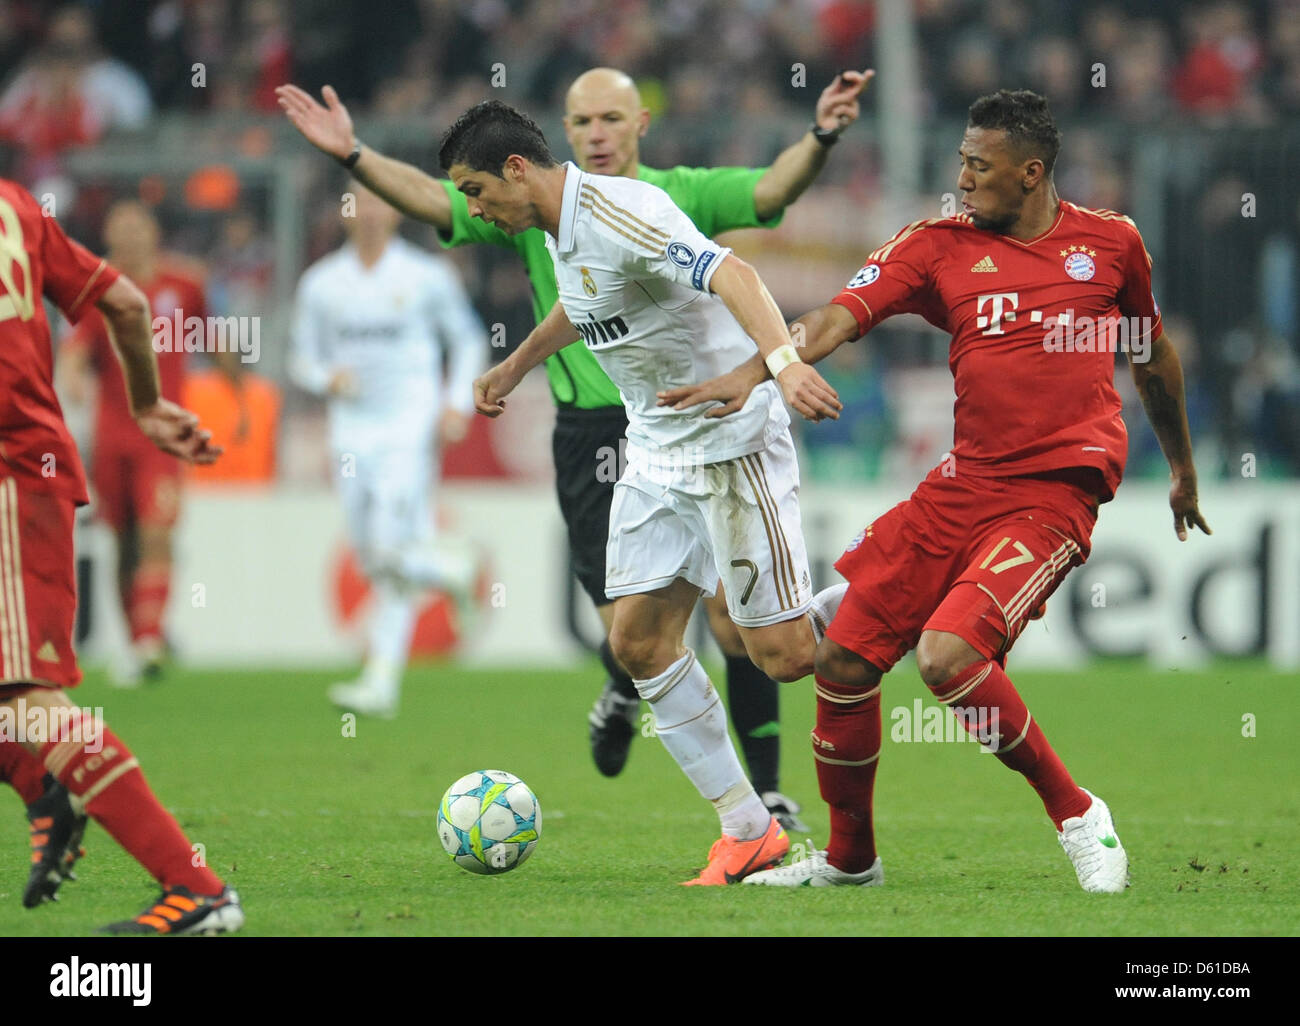 Munich's Cristiano Ronaldo (L) and Madrid's Jerome Boateng vie for the ball during the Champions League semi-final first leg soccer match between FC Bayern Munich and Real Madrid at the Allianz Arena in Munich, Germany, 17 April 2012. Photo: Andreas Gebert dpa/lby Stock Photo